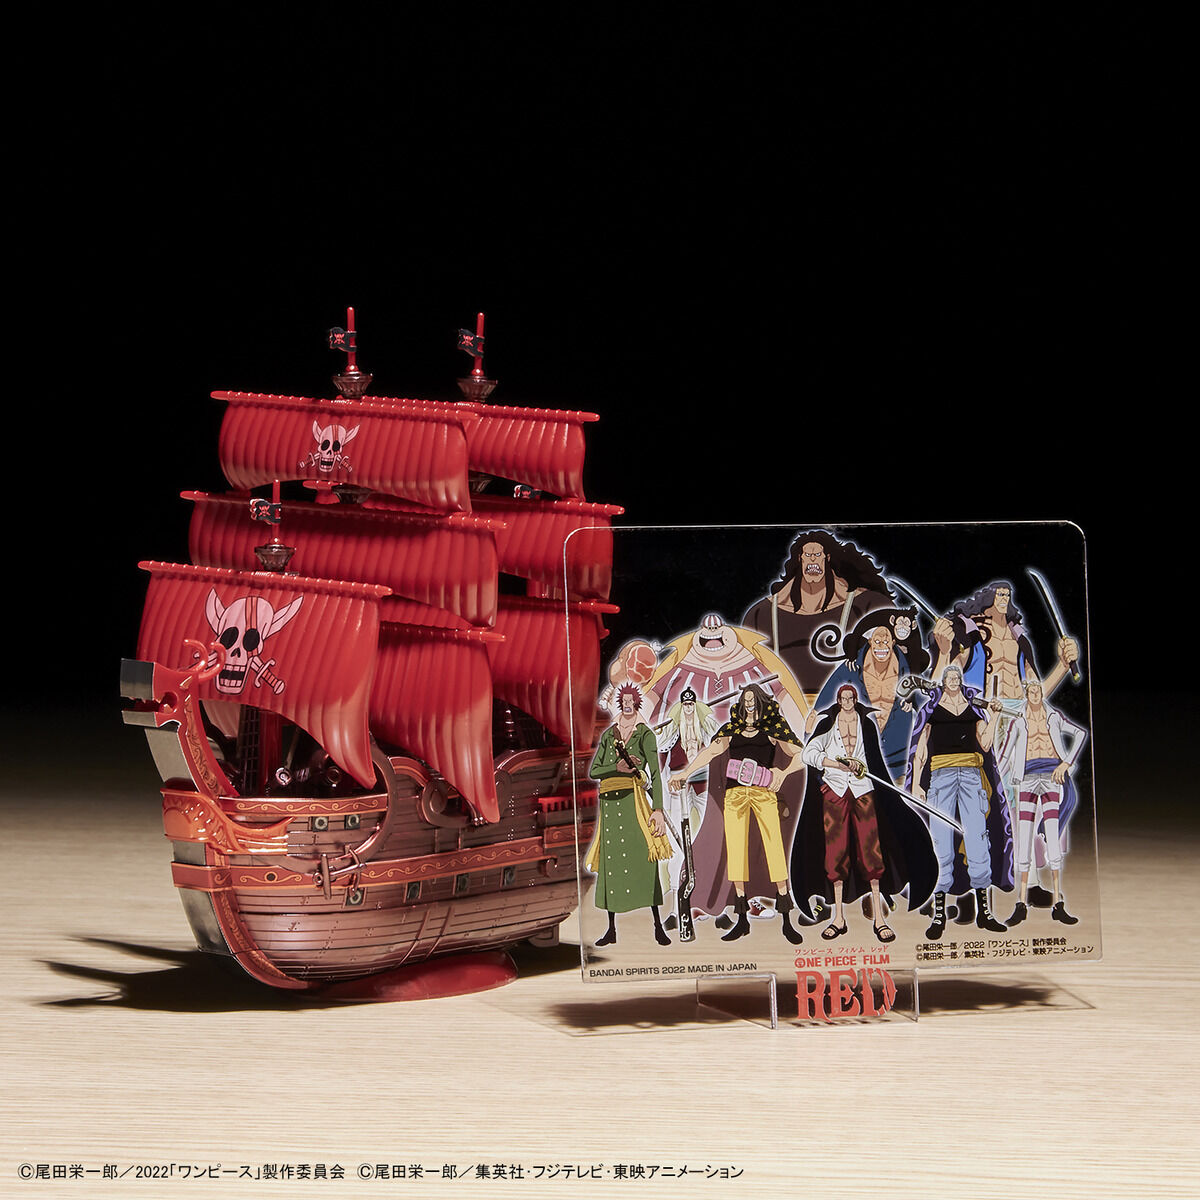 One Piece - Red Force - RED FILM Special - Grand Ship Collection Model Kit (Bandai), Metallic red color scheme inspired by the movie "ONE PIECE FILM RED", character plates of the Red Hair Pirates included, display base and ocean wave effects for added realism, foil and marking stickers included, released by Nippon Figures